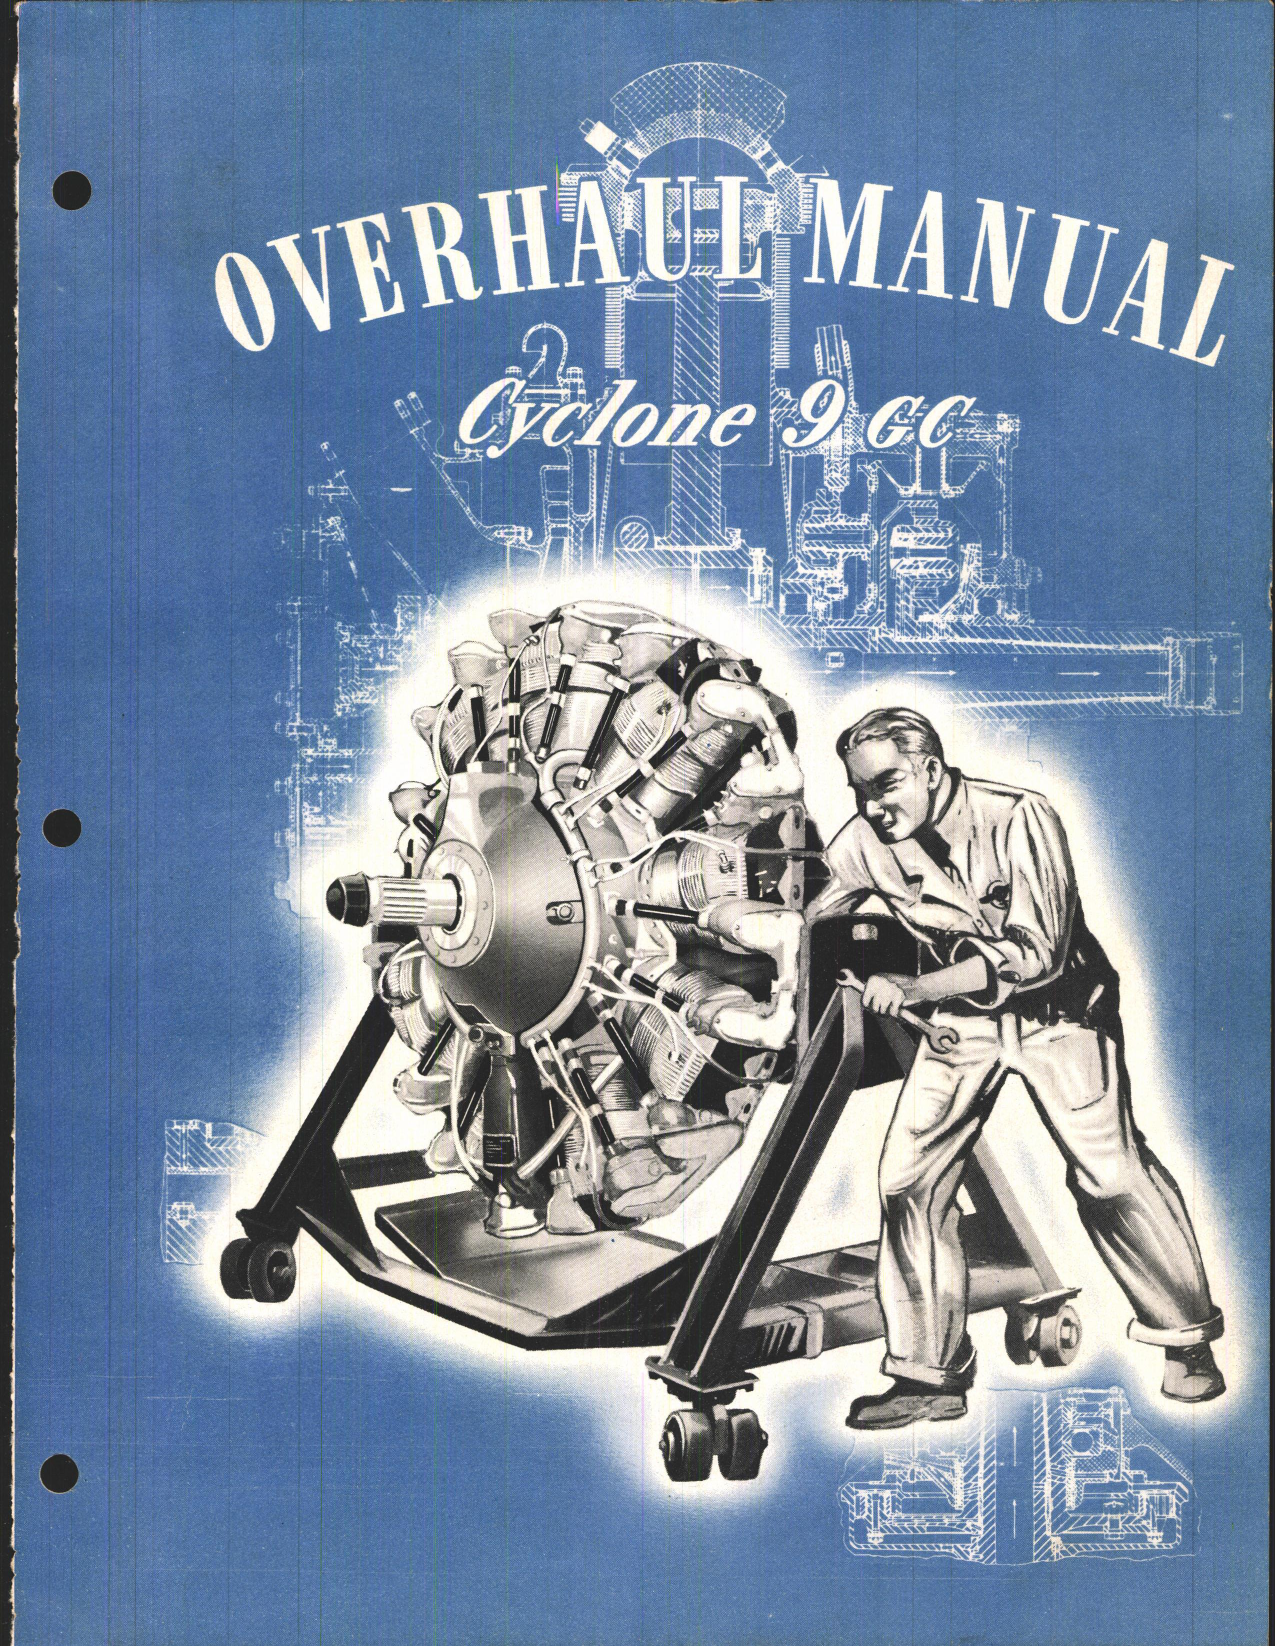 Sample page 1 from AirCorps Library document: Overhaul Manual for Cyclone 9 GC Engine